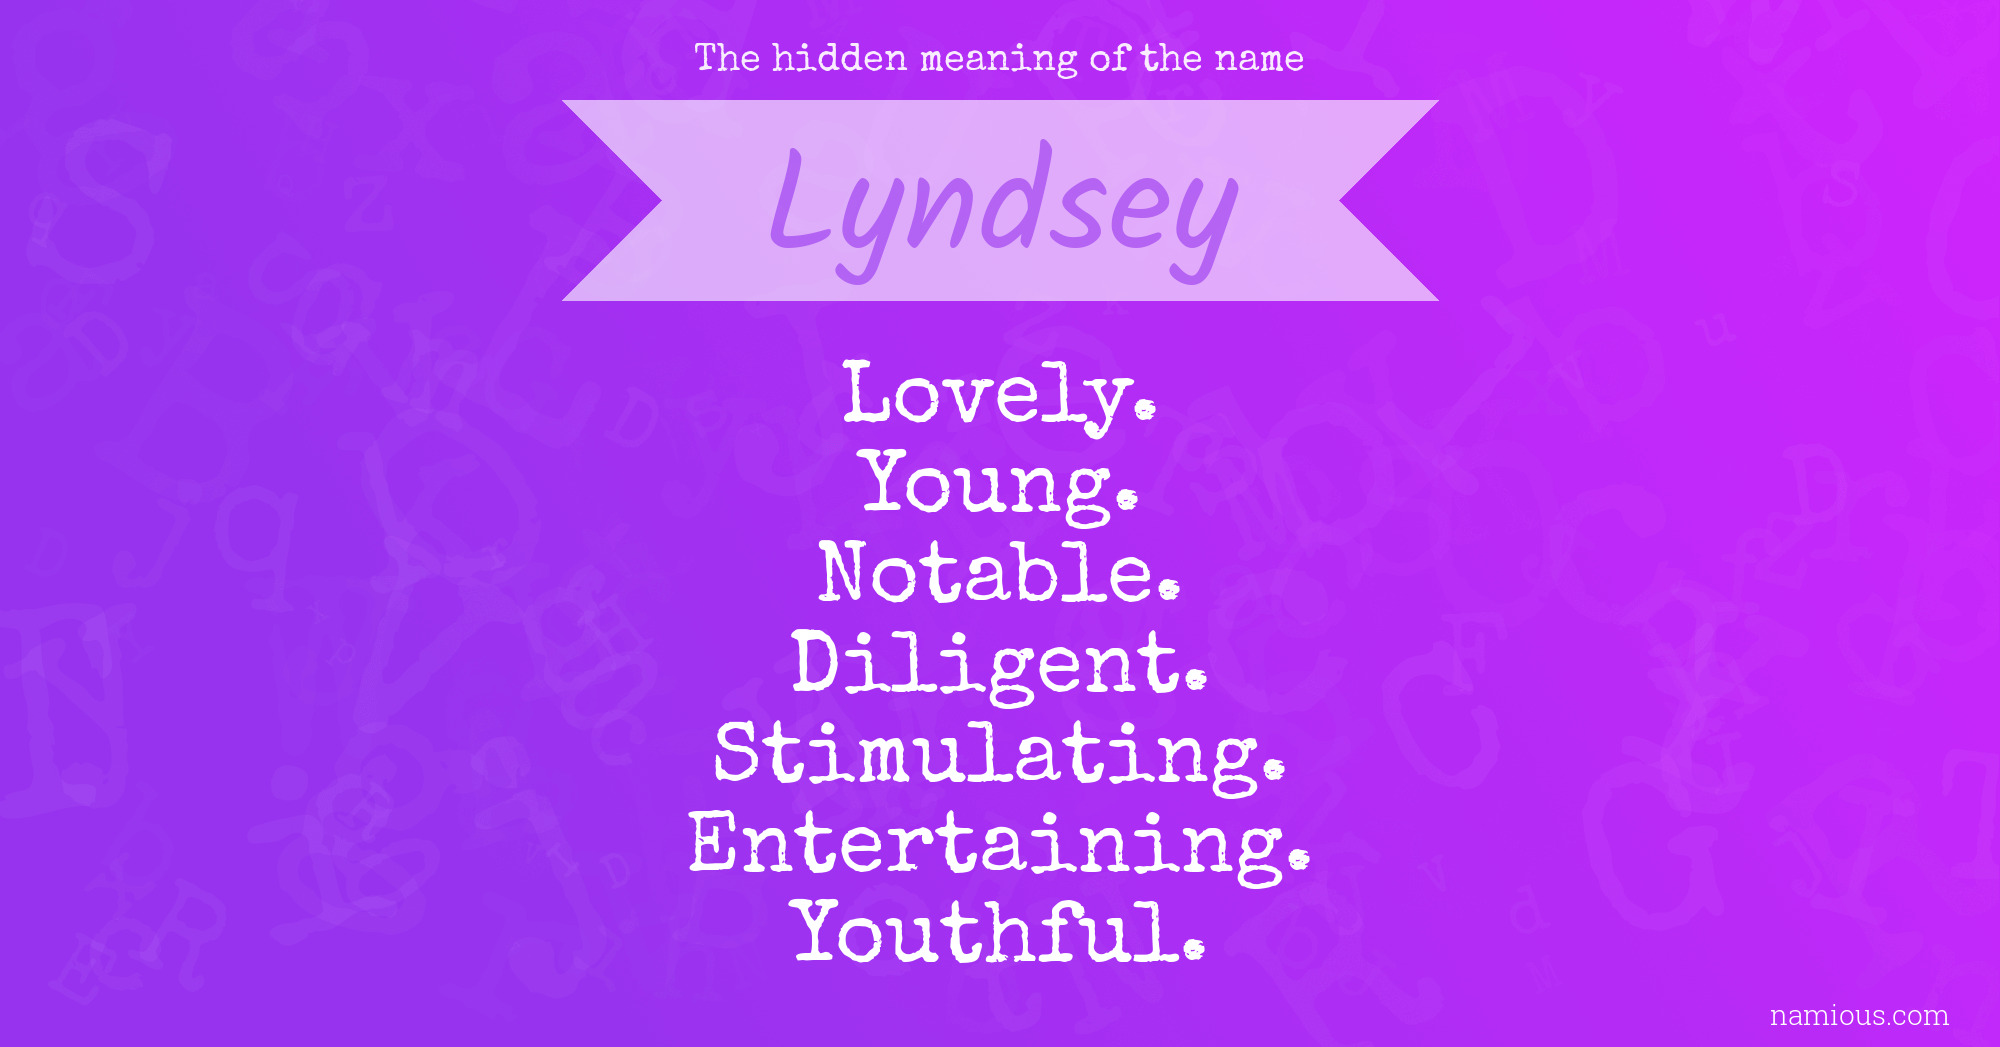 The hidden meaning of the name Lyndsey